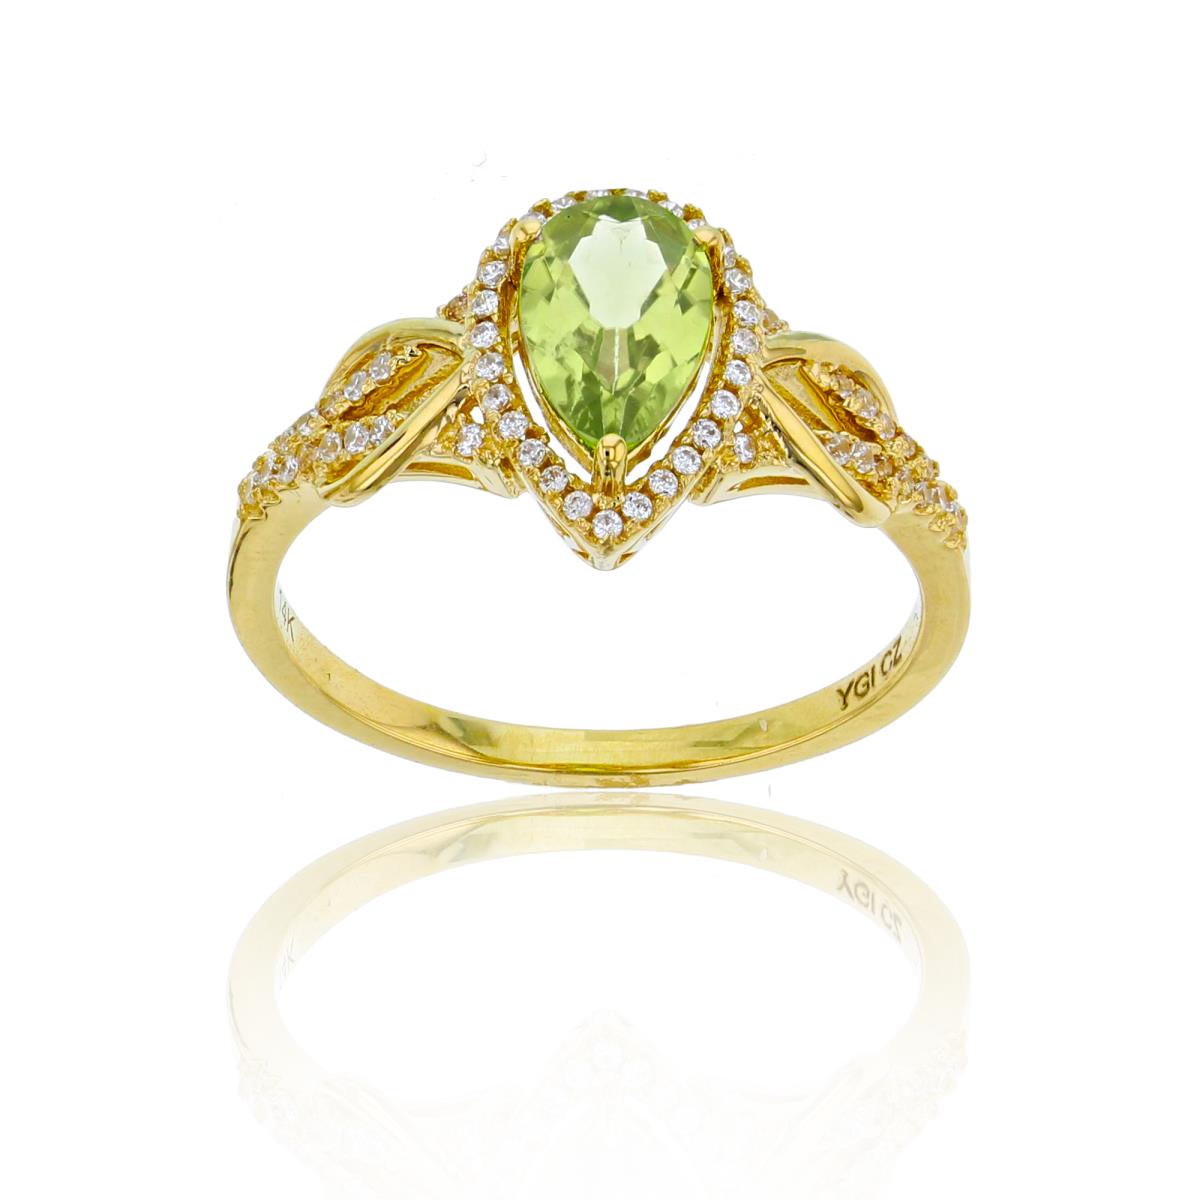 Sterling Silver Yellow 0.17CTTW Rnd Diamond & 8x5mm Pear Cut Peridot Knot Sides Ring